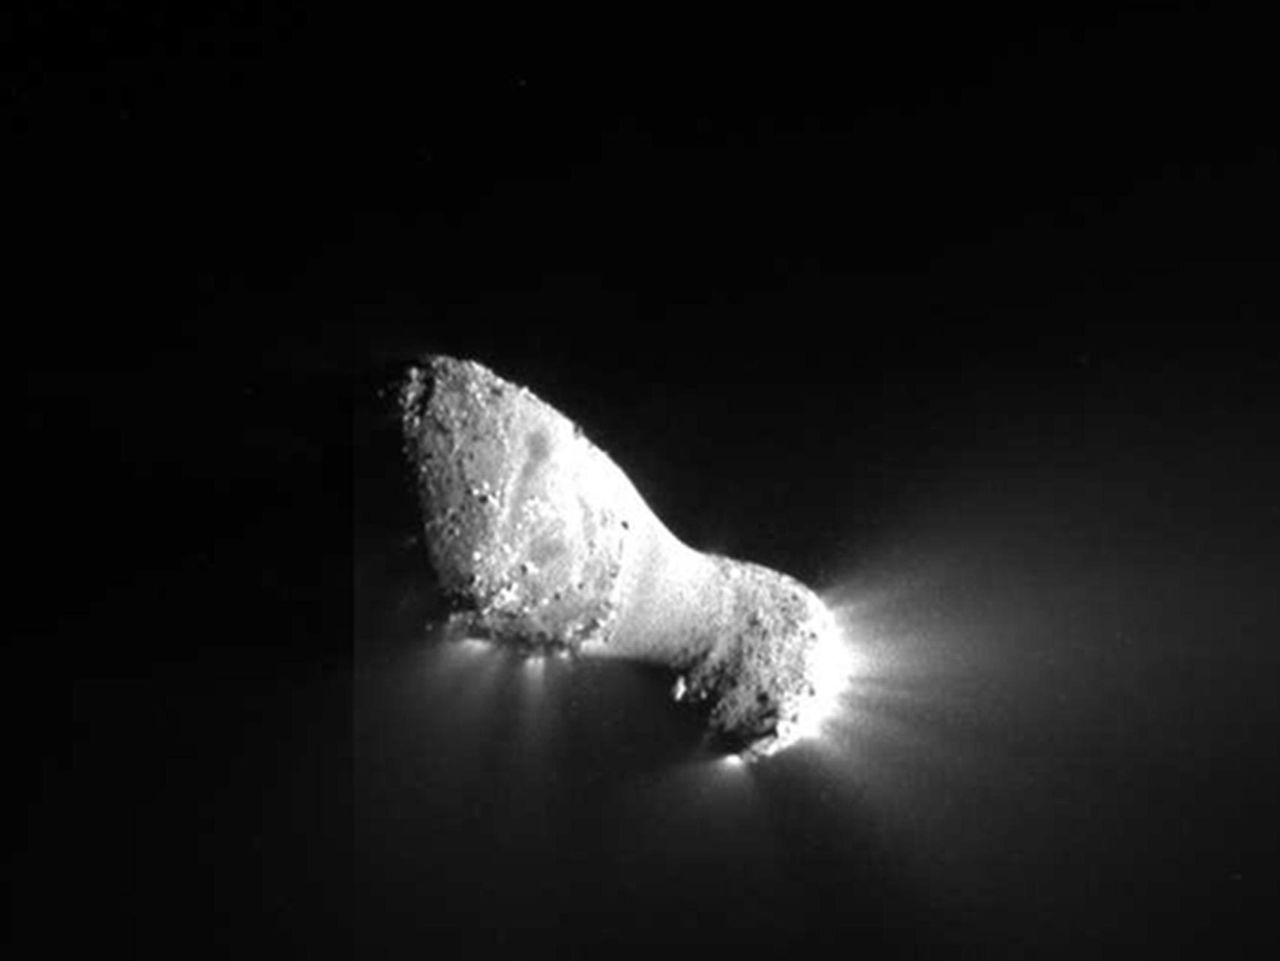 This close-up view of Comet Hartley 2 was taken by NASA's EPOXI mission during a fly-by of the comet on November 4, 2010.